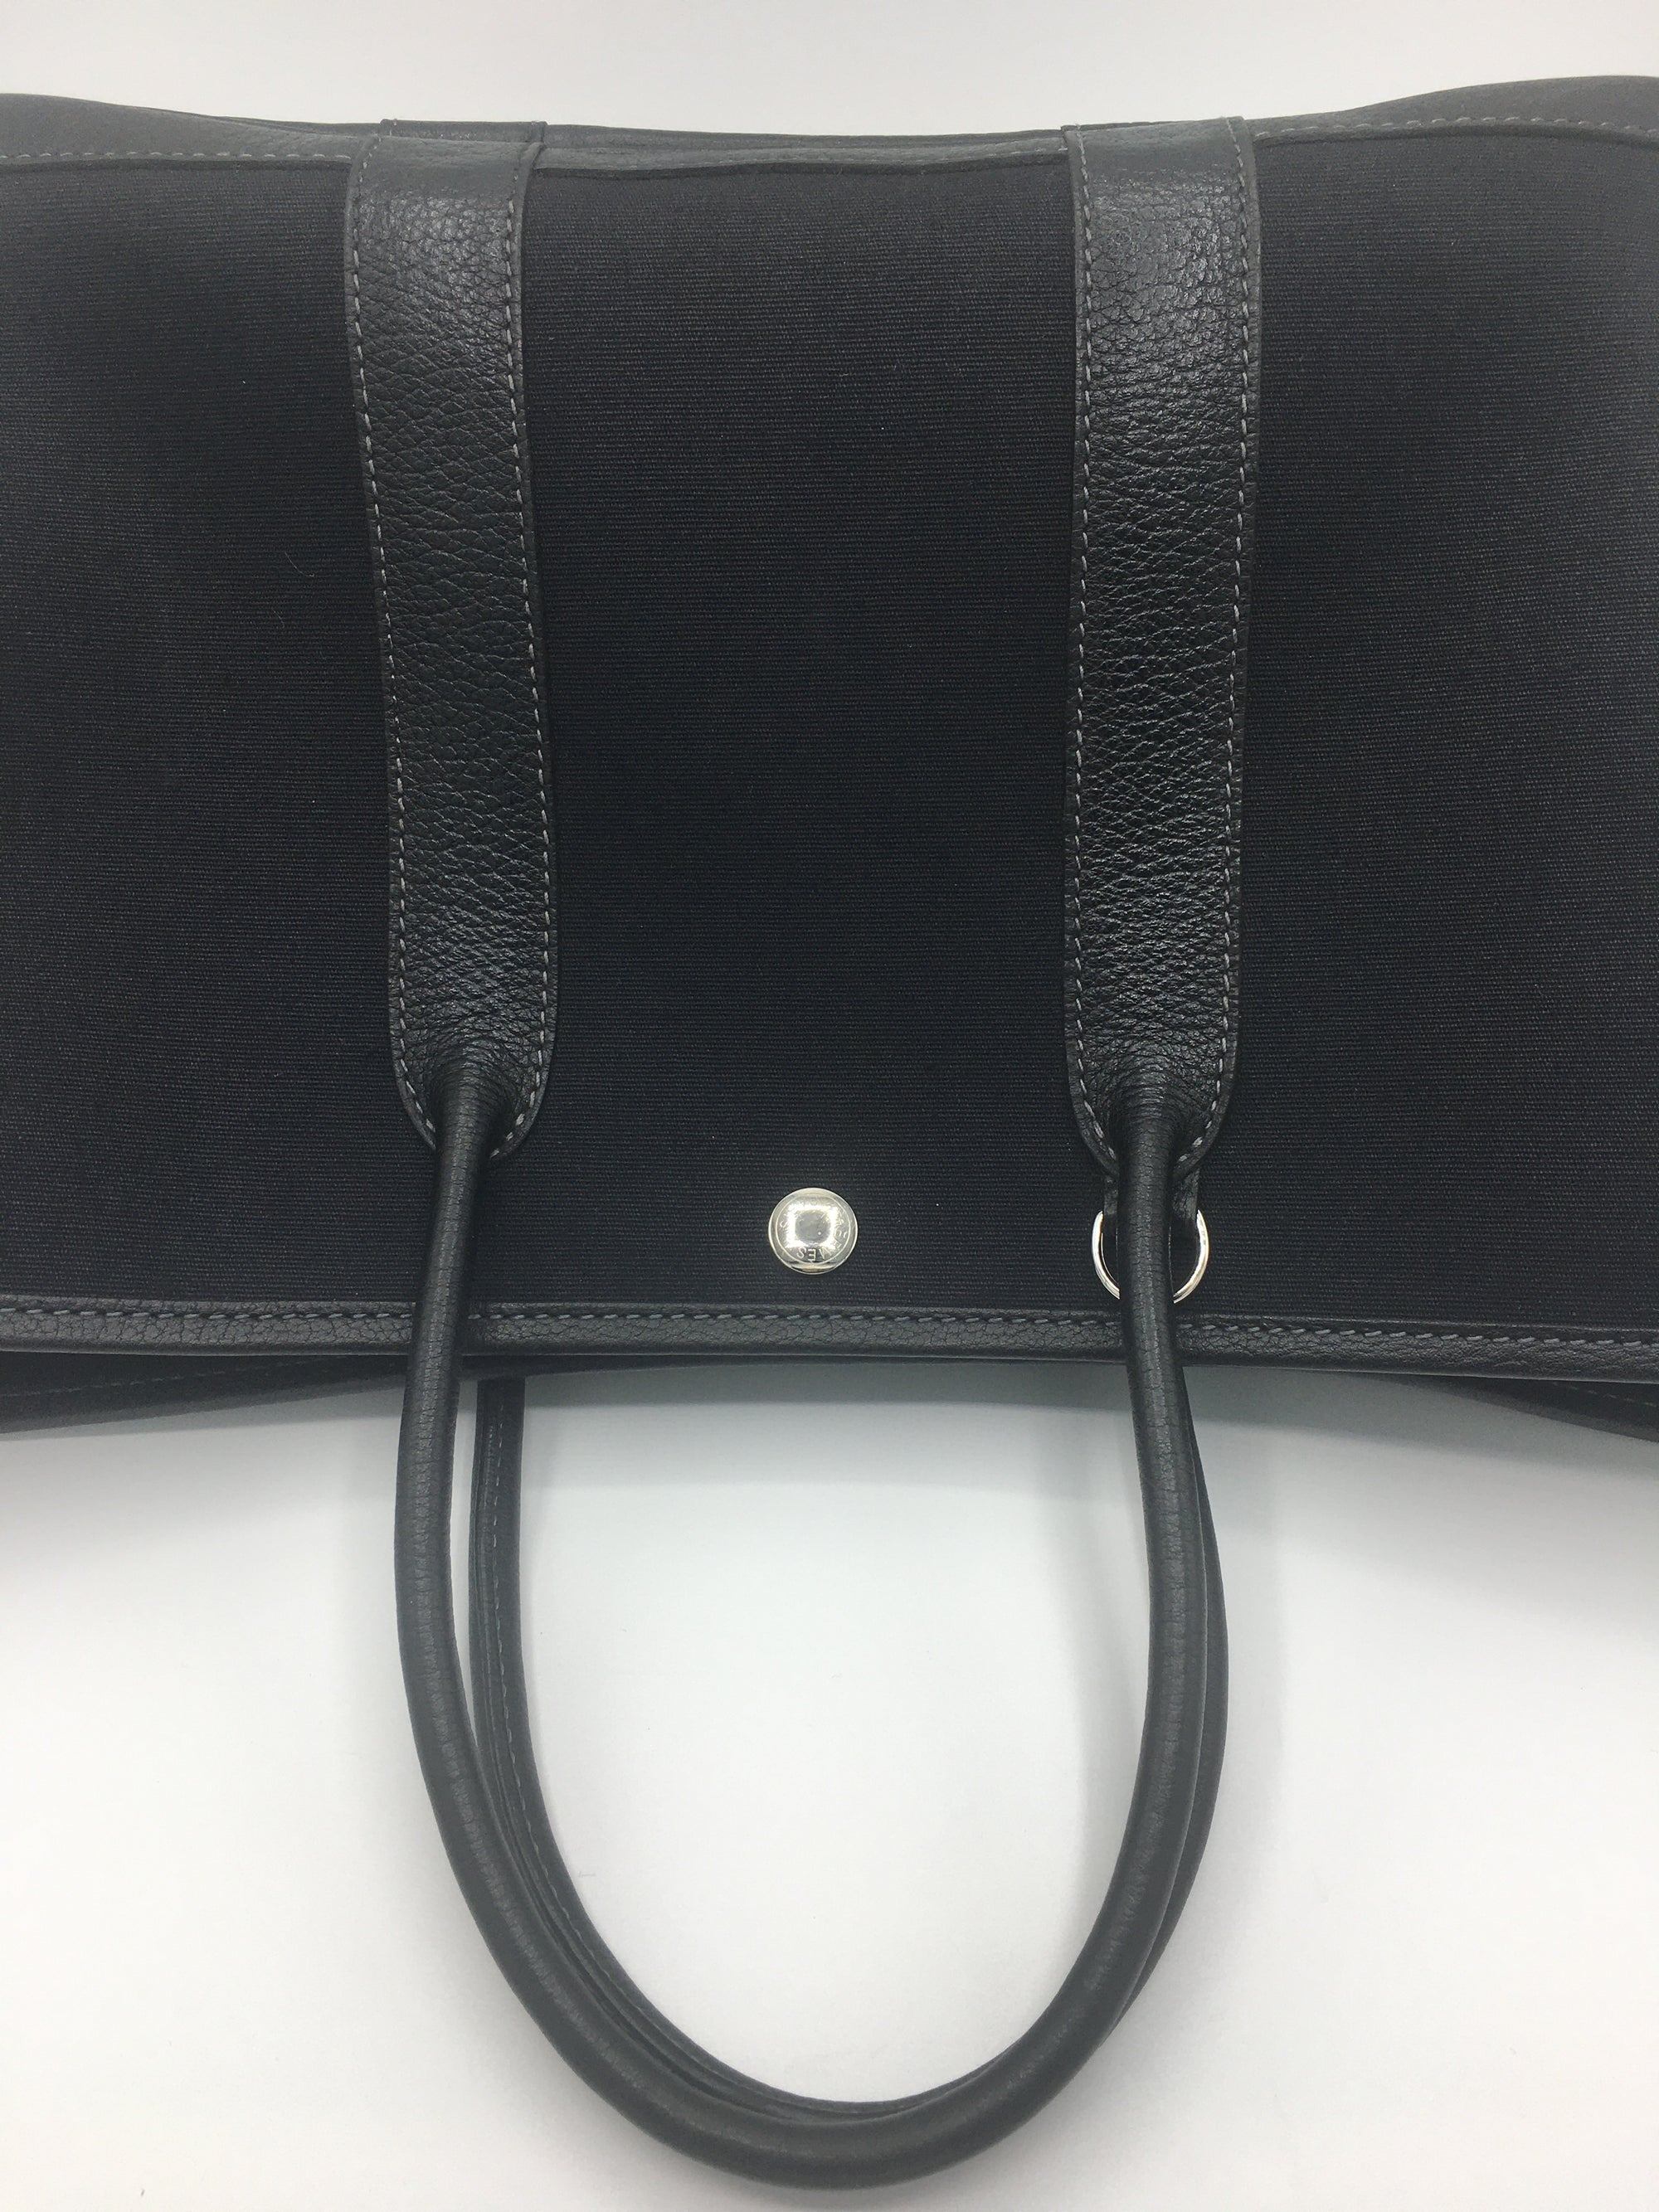 Hermès Garden Party 30 Black Canvas and Leather (Rodeo Sold